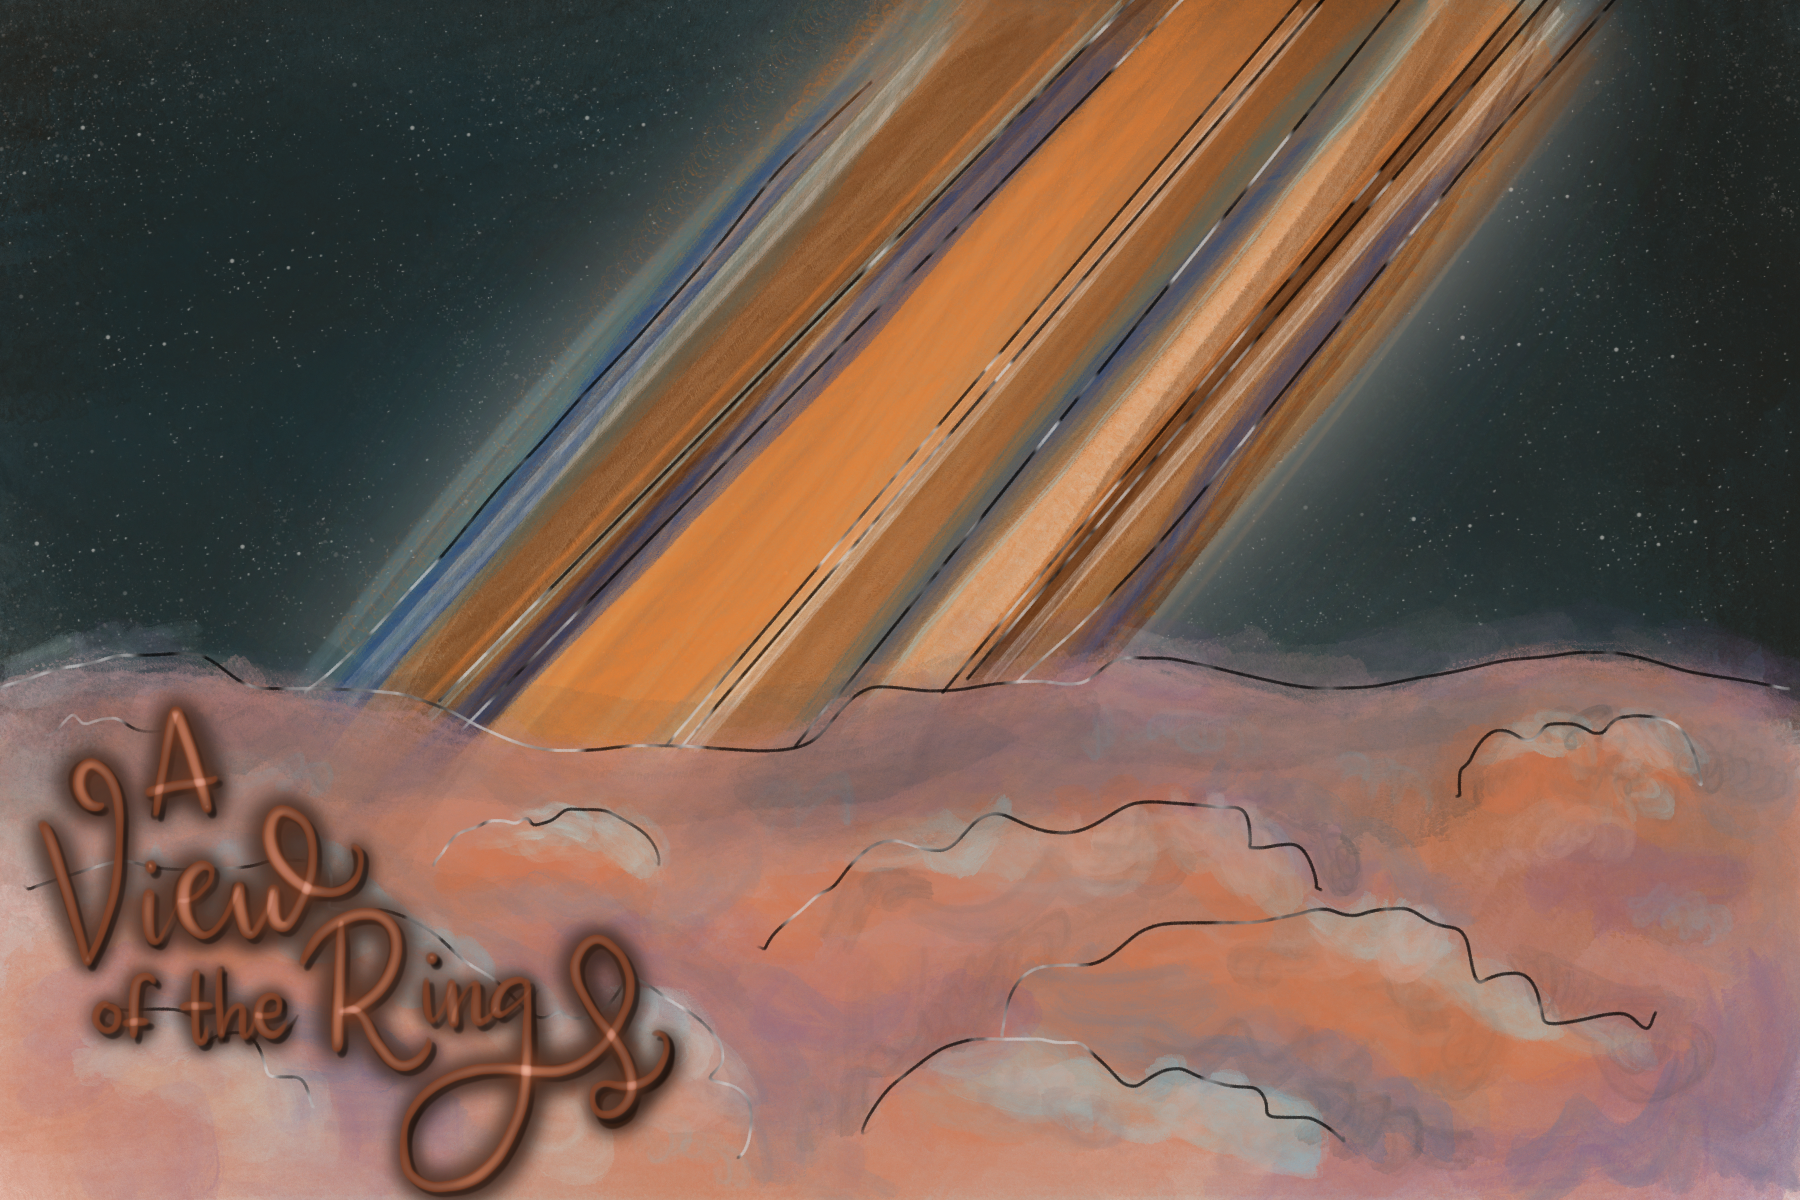 (Front) A sea of pink, purple, and light orange clouds on the lower half of the image with Saturn's rings seemingly rising up out of them, illustrated as a series of colorful lines in blues, purples, golds, and browns. The starry black expanse of space fills the rest of the background. The words "A View of the Rings" are written in bronze cursive letters in the lower left corner.